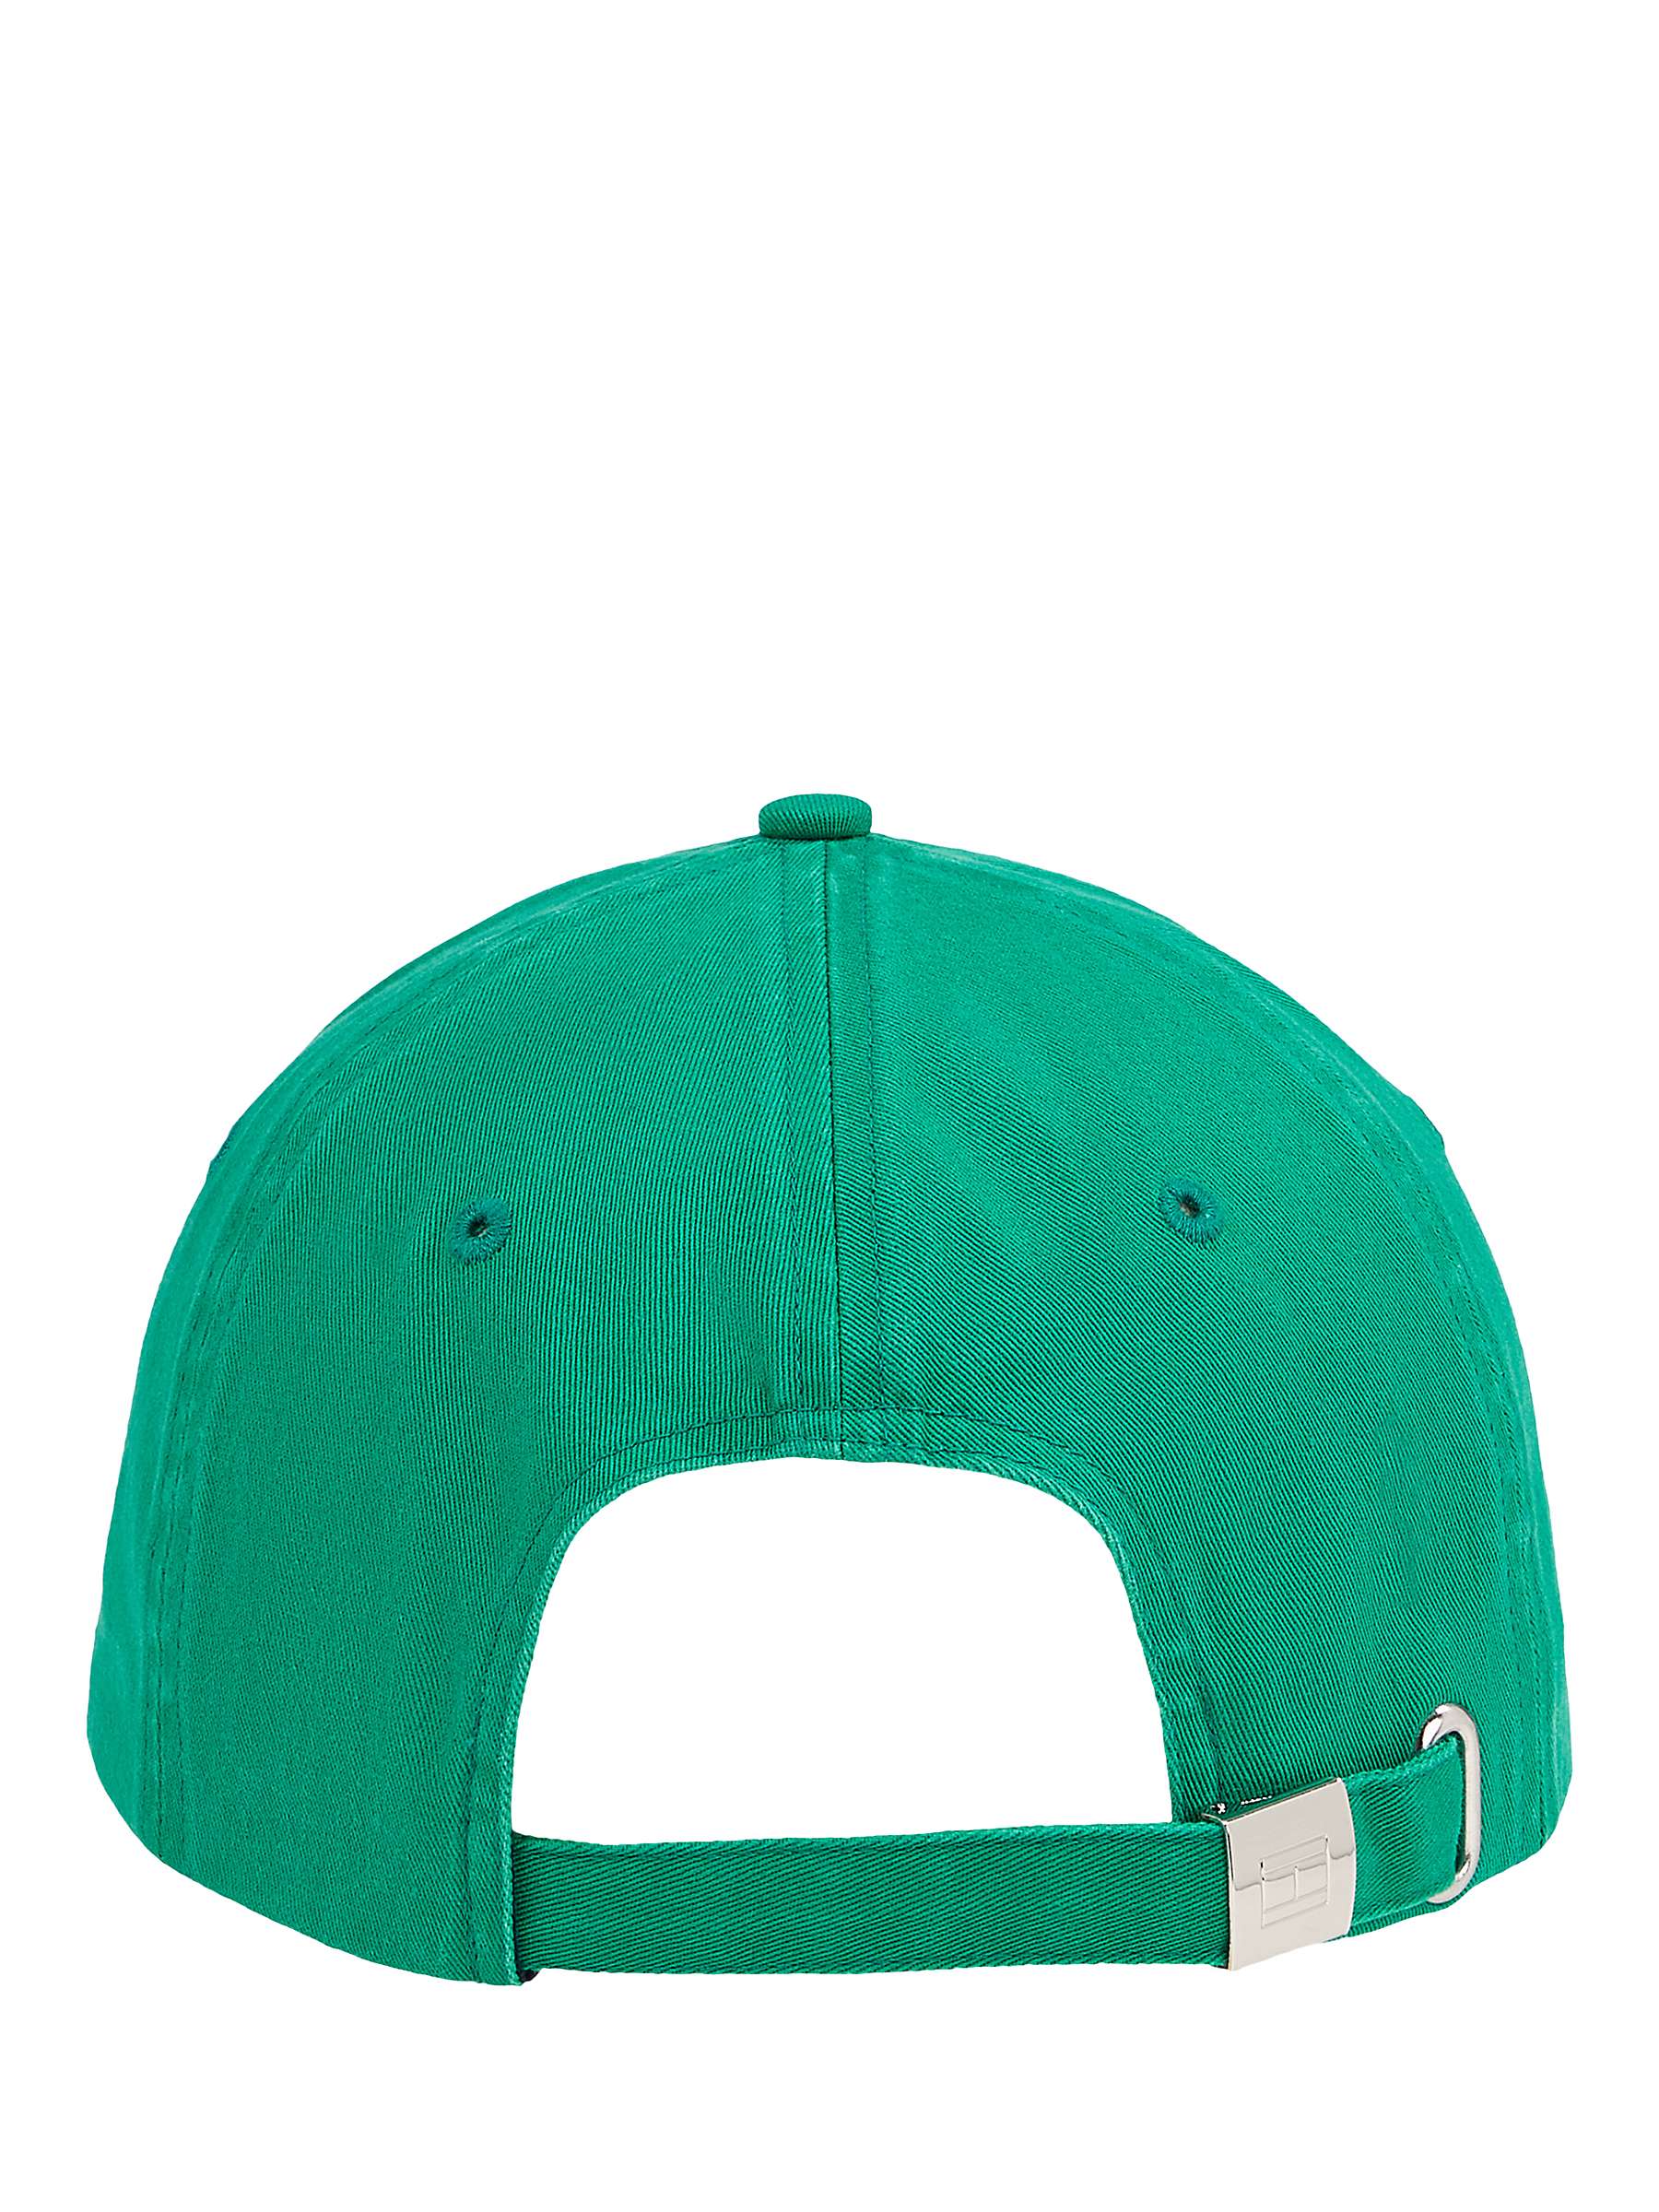 Buy Tommy Hilfiger Essential Flag Soft Cap, Olympic Green Online at johnlewis.com